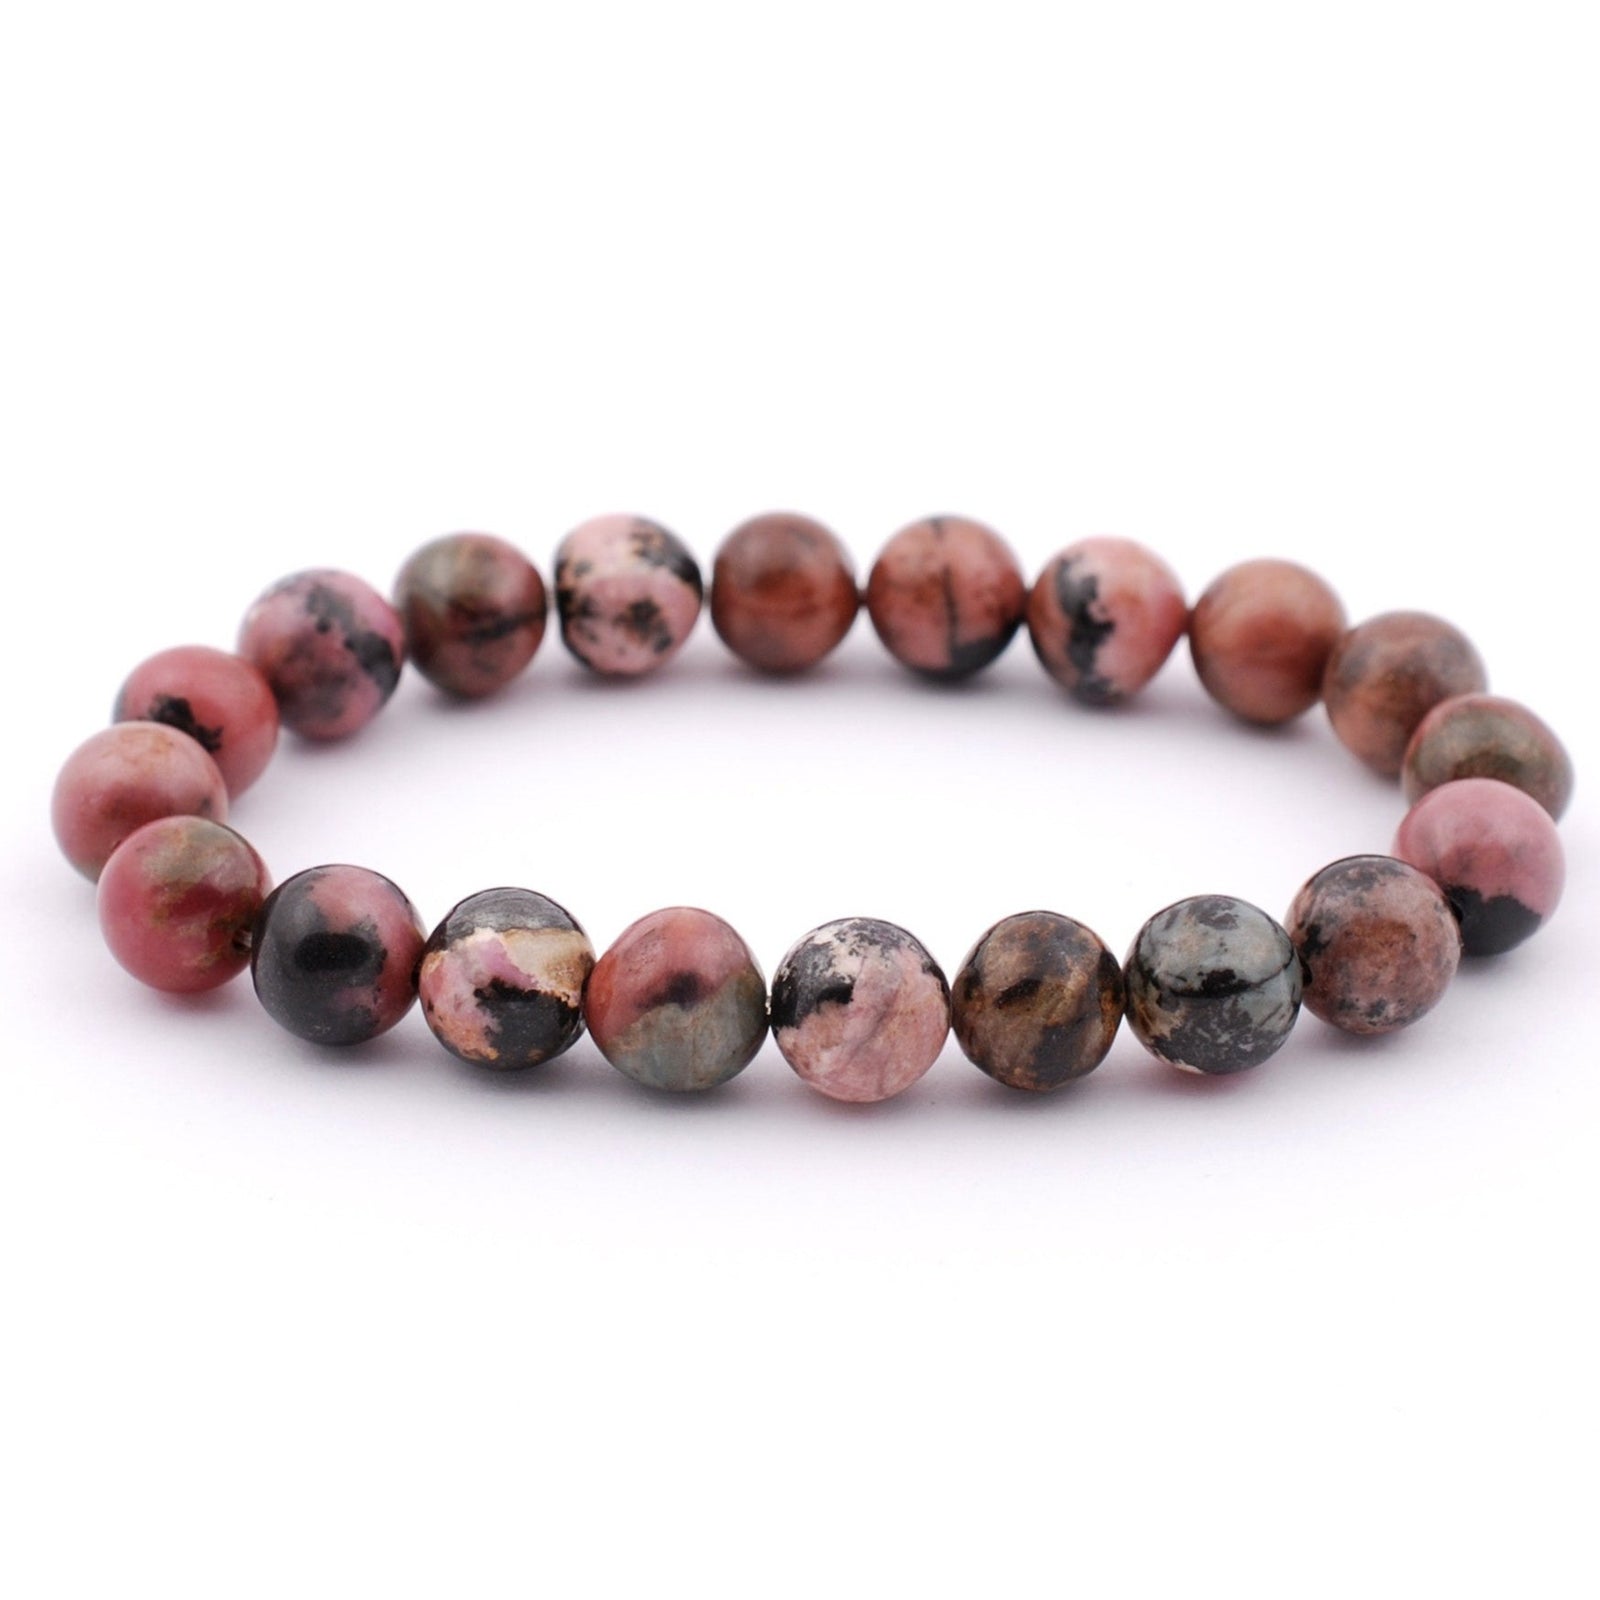 Rhodonite aids in cases of emotional self-destruction, codependency and abuse. It encourages unselfish self-love and forgiveness. Promotes remaining calm in dangerous or upsetting situations. Builds confidence and alleviates confusion.